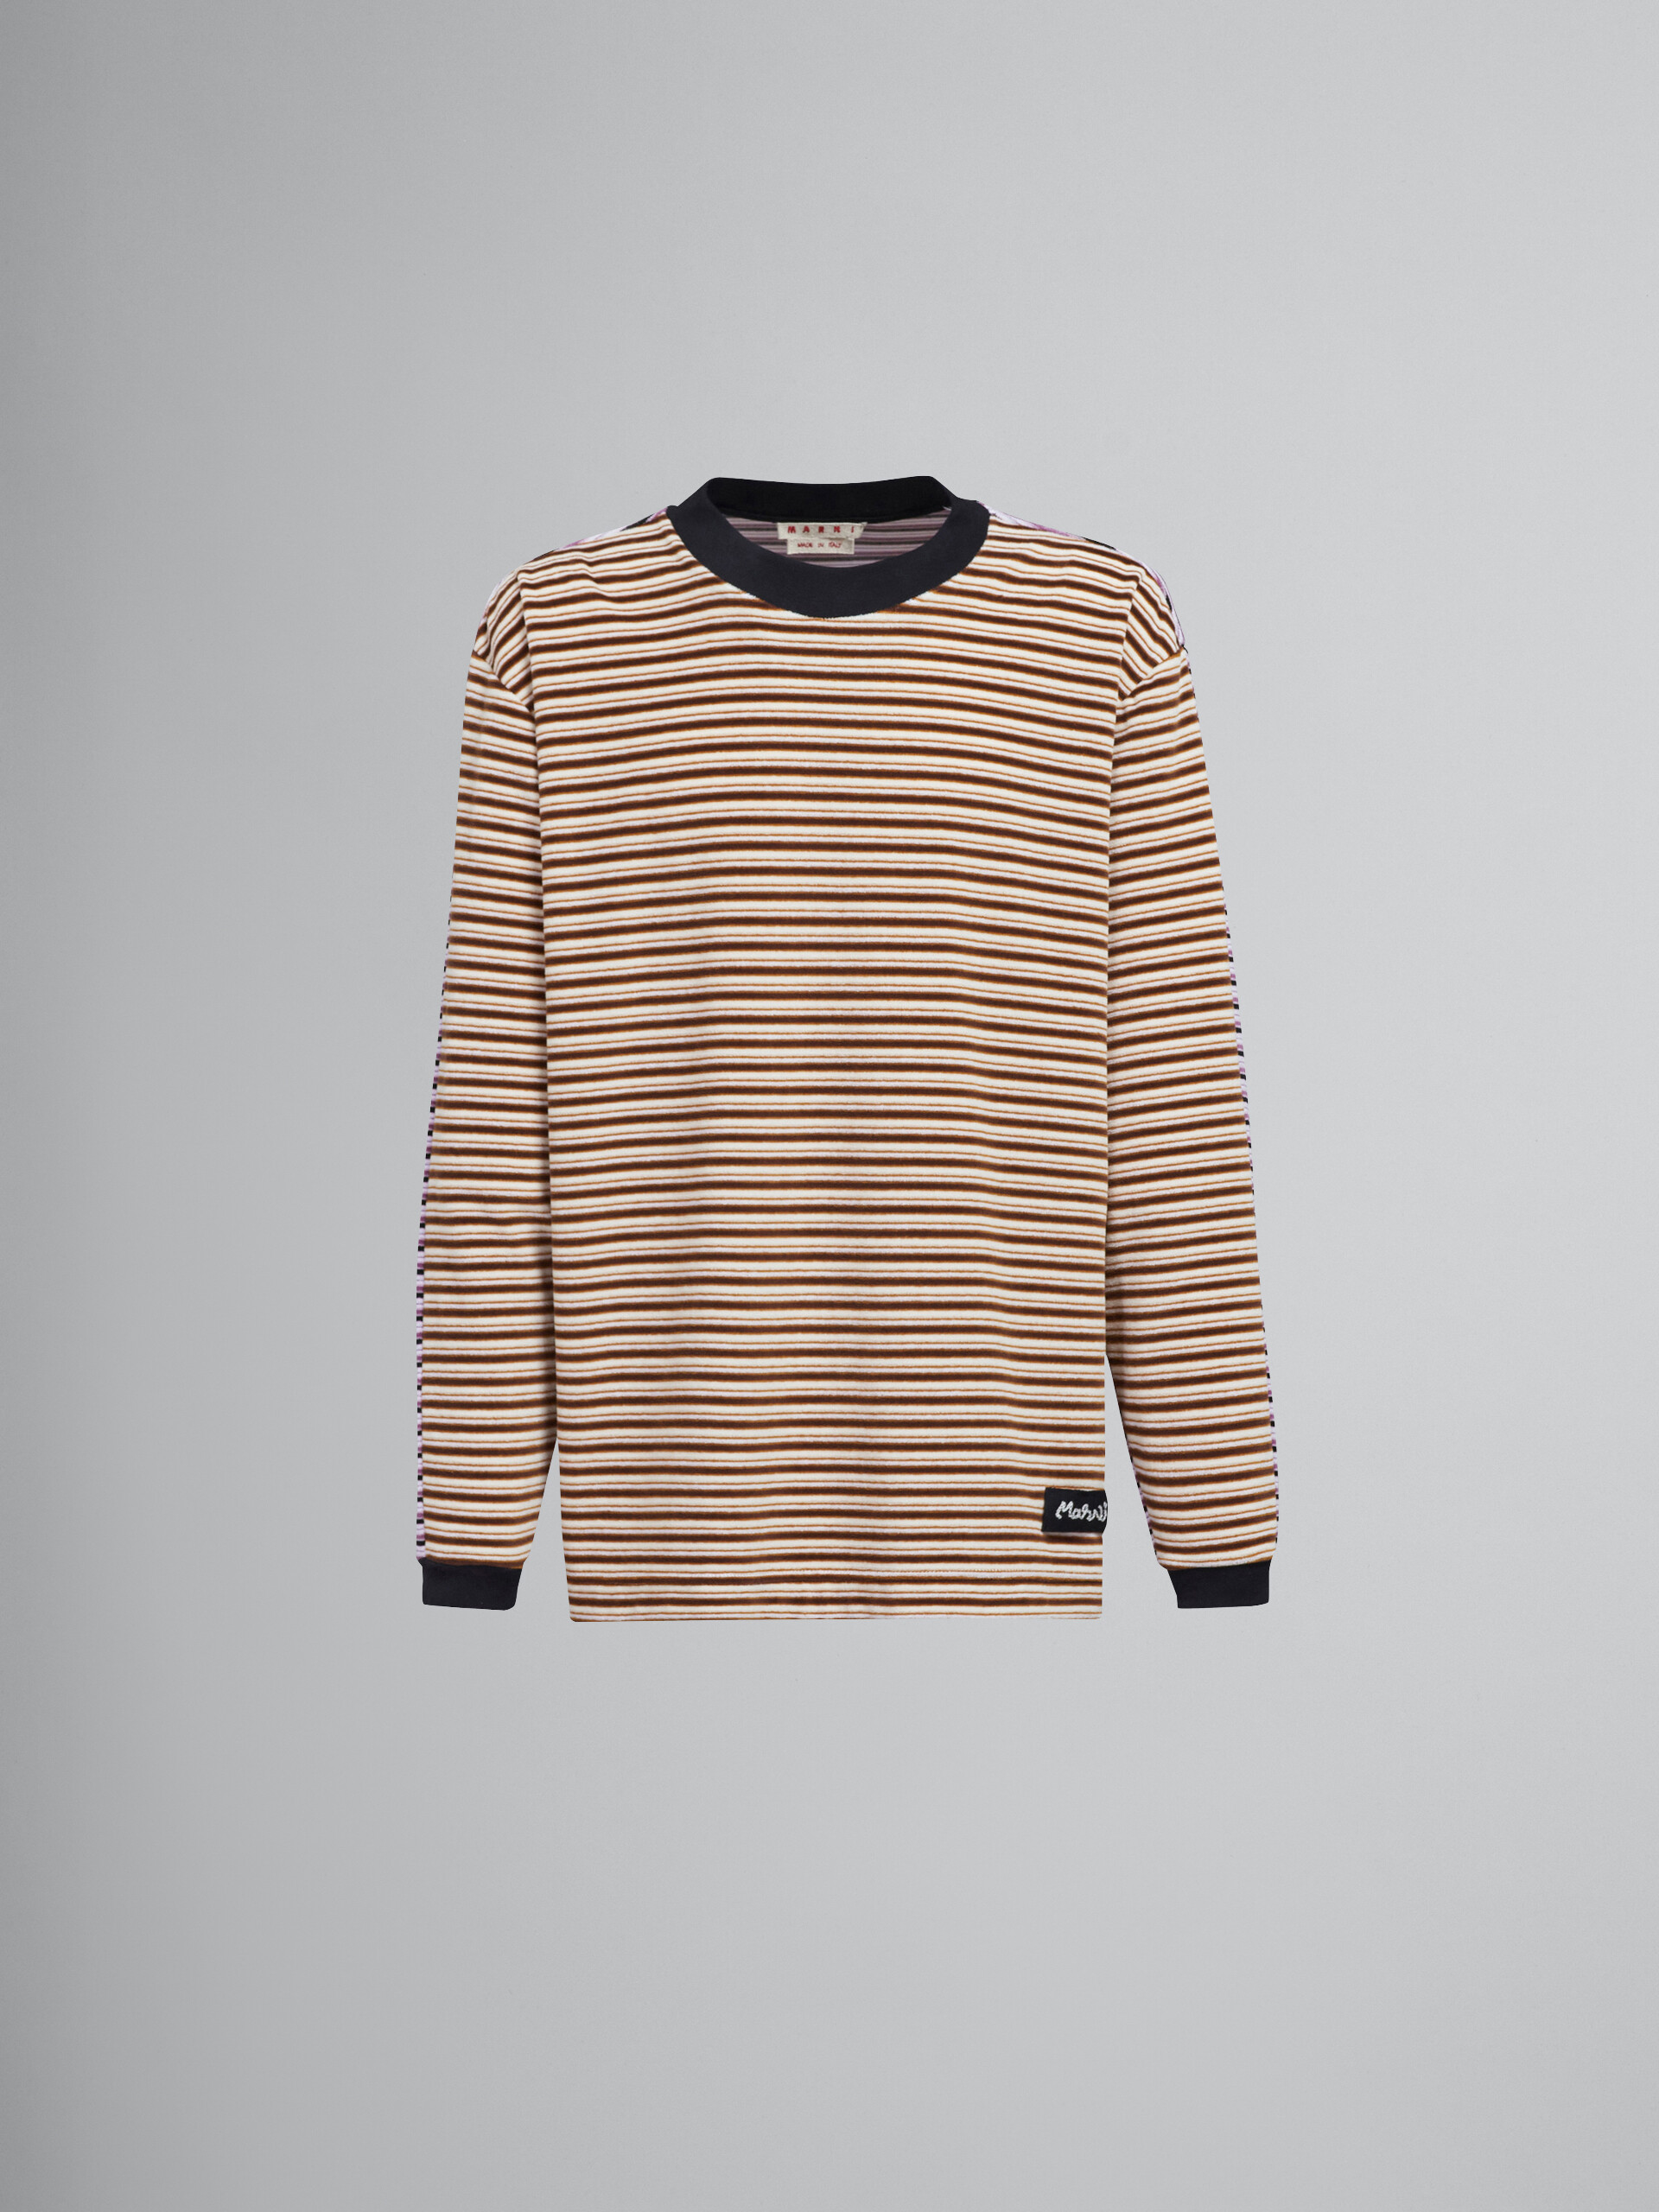 Striped velour long-sleeved T-shirt - T-shirts - Image 1